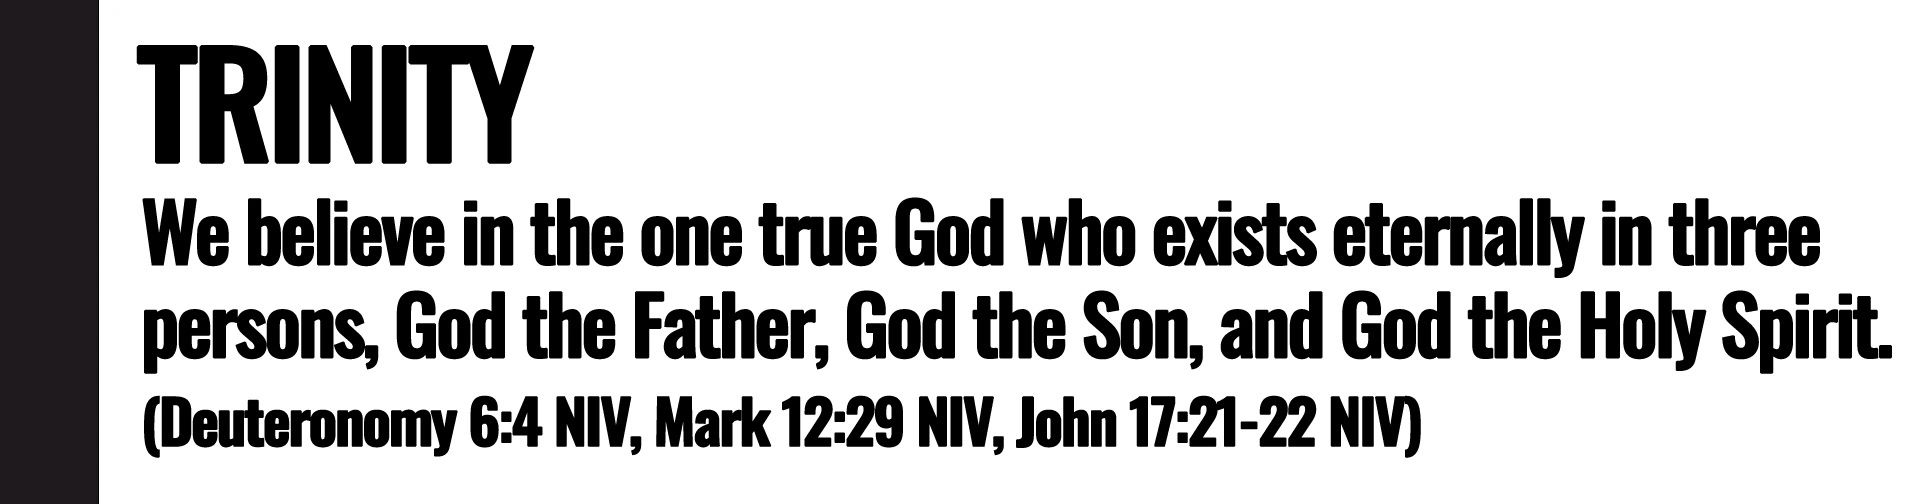 We believe in the one true God who exists eternally in three persons, God the Father, God the Son...